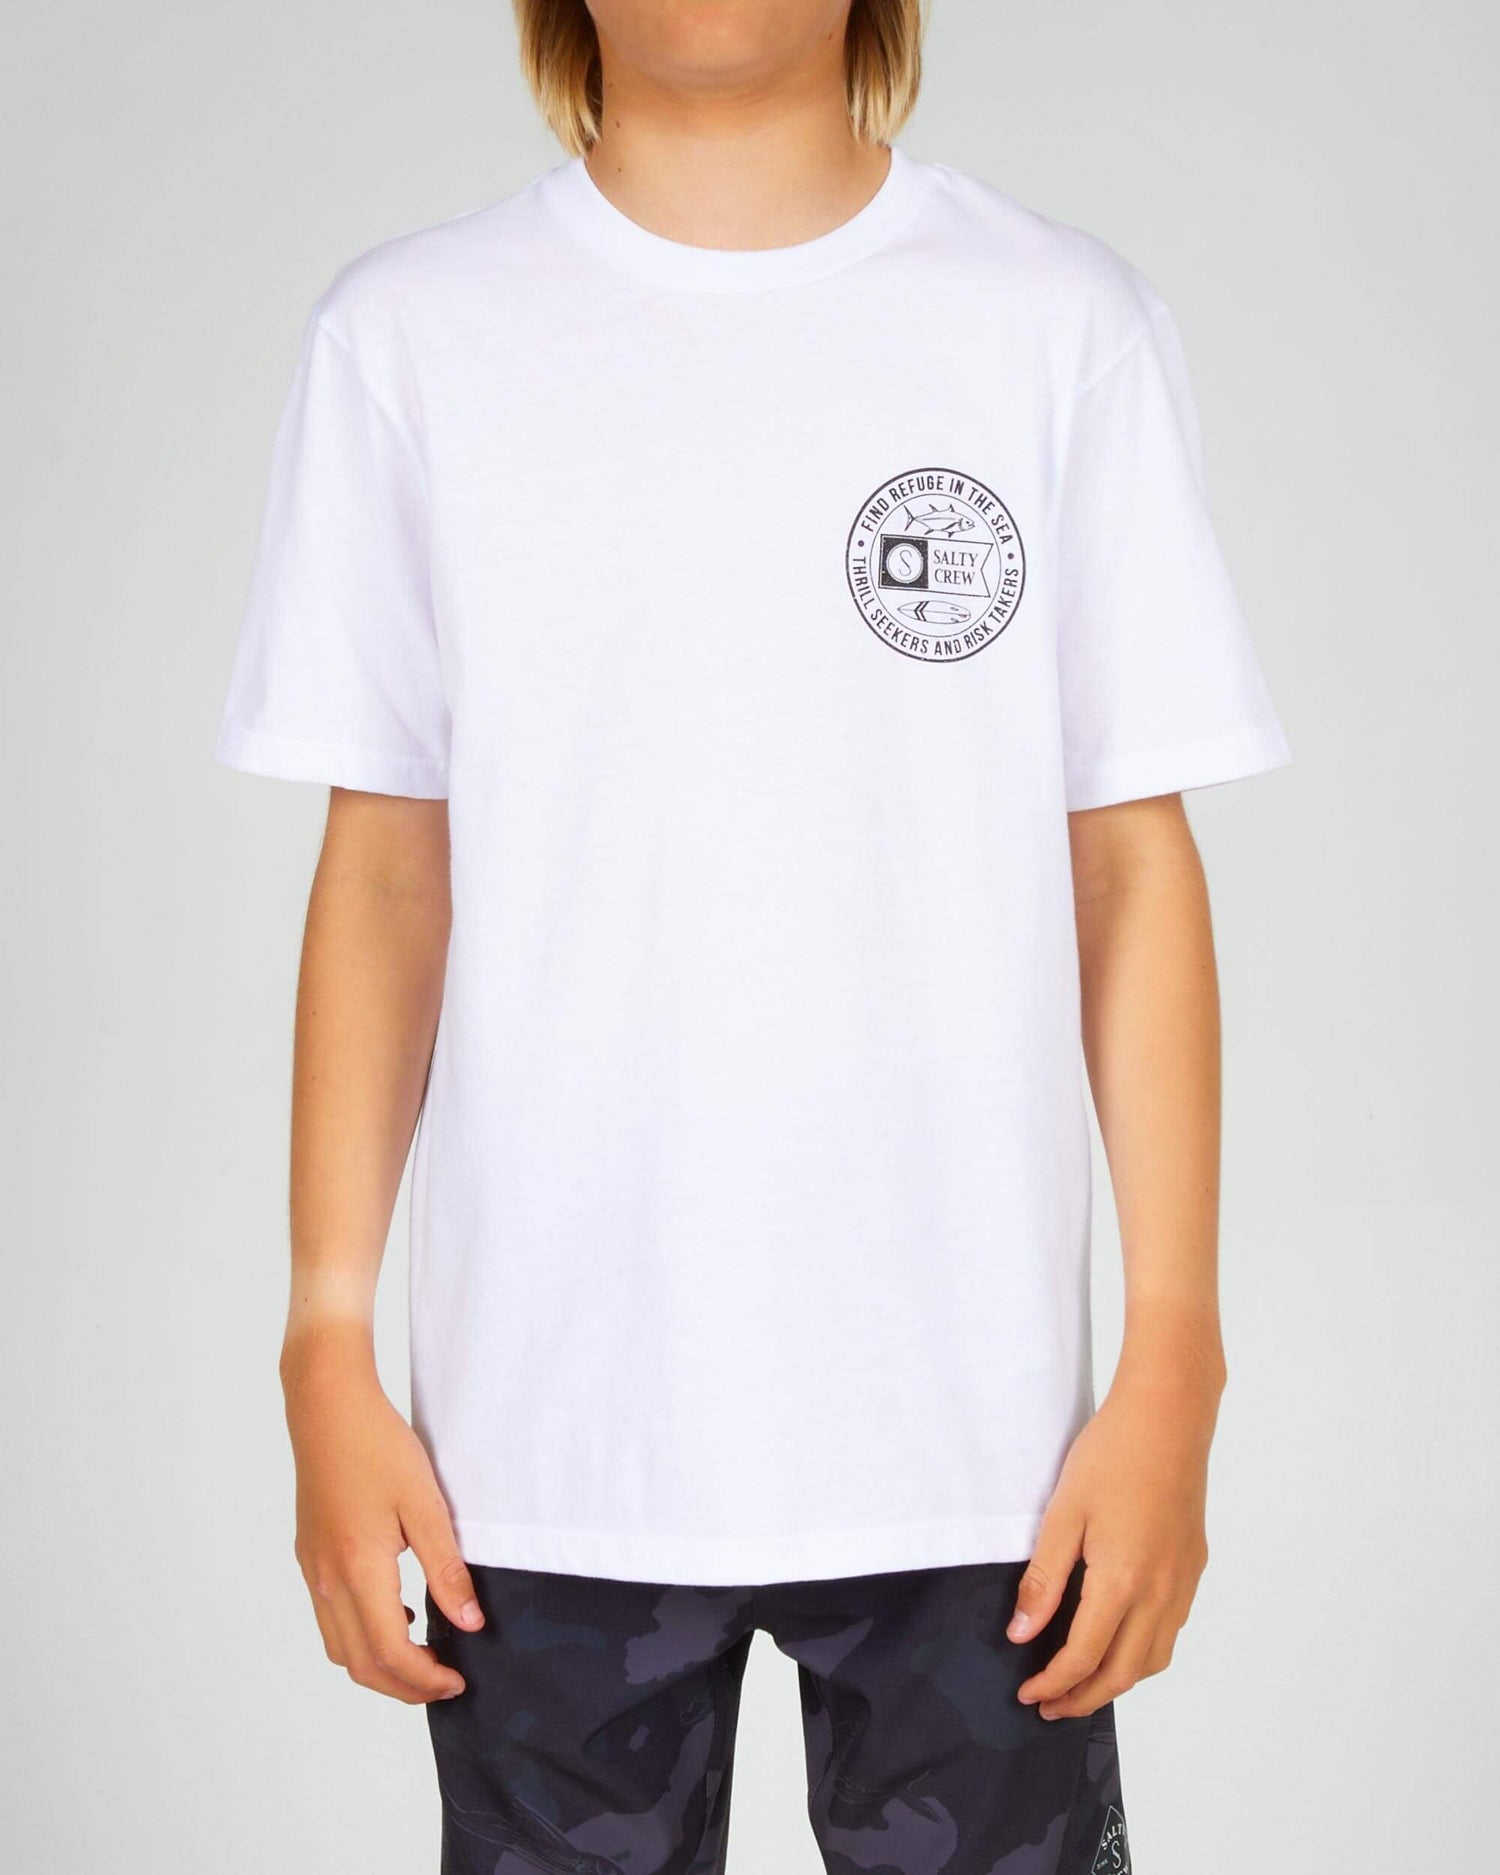 Salty crew T-SHIRTS S/S LEGENDS BOYS S/S TEE - White in White